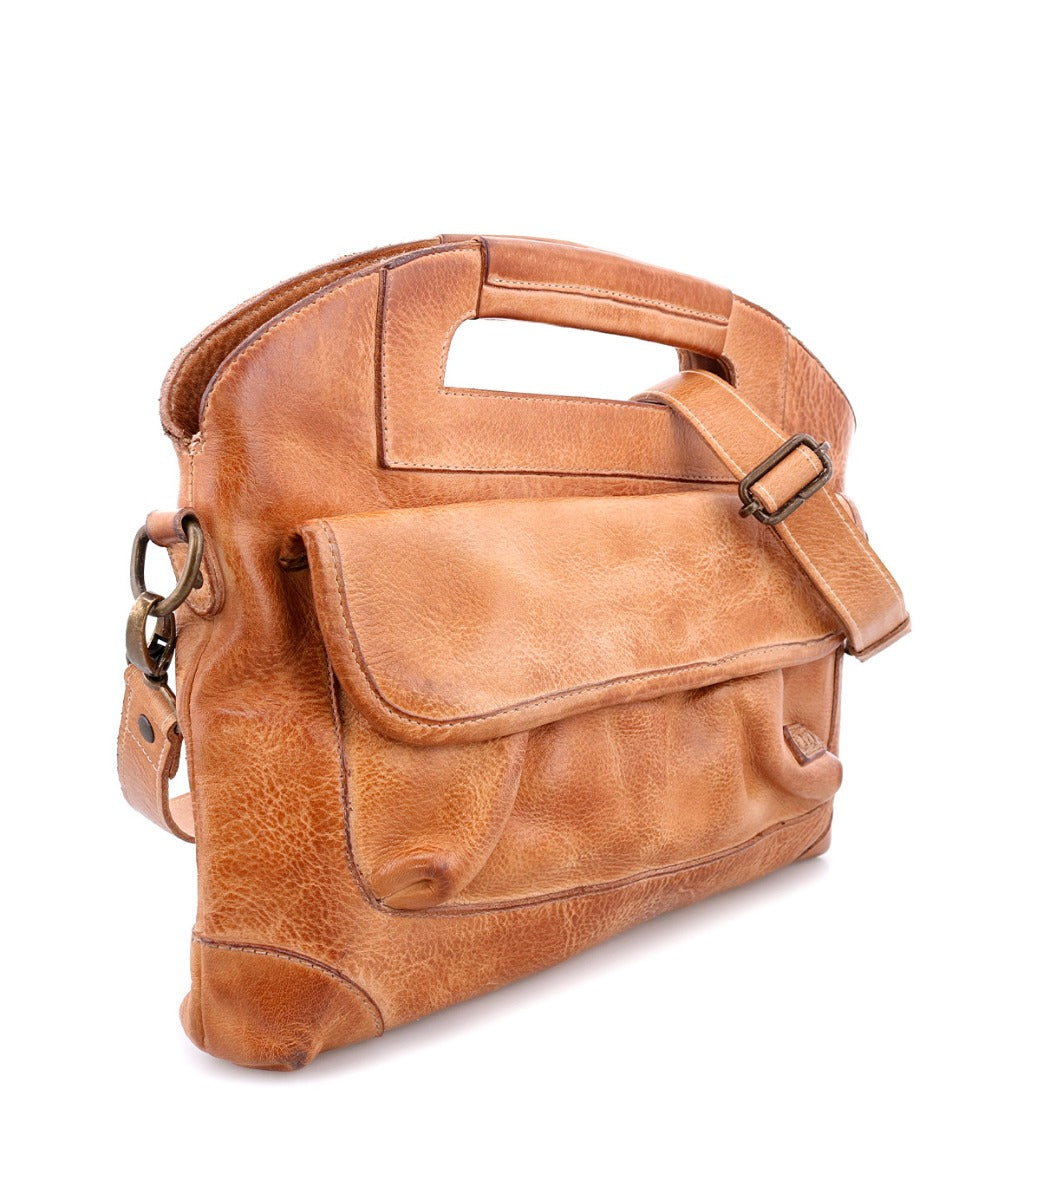 A Greenway leather bag with a shoulder strap from Bed Stu.